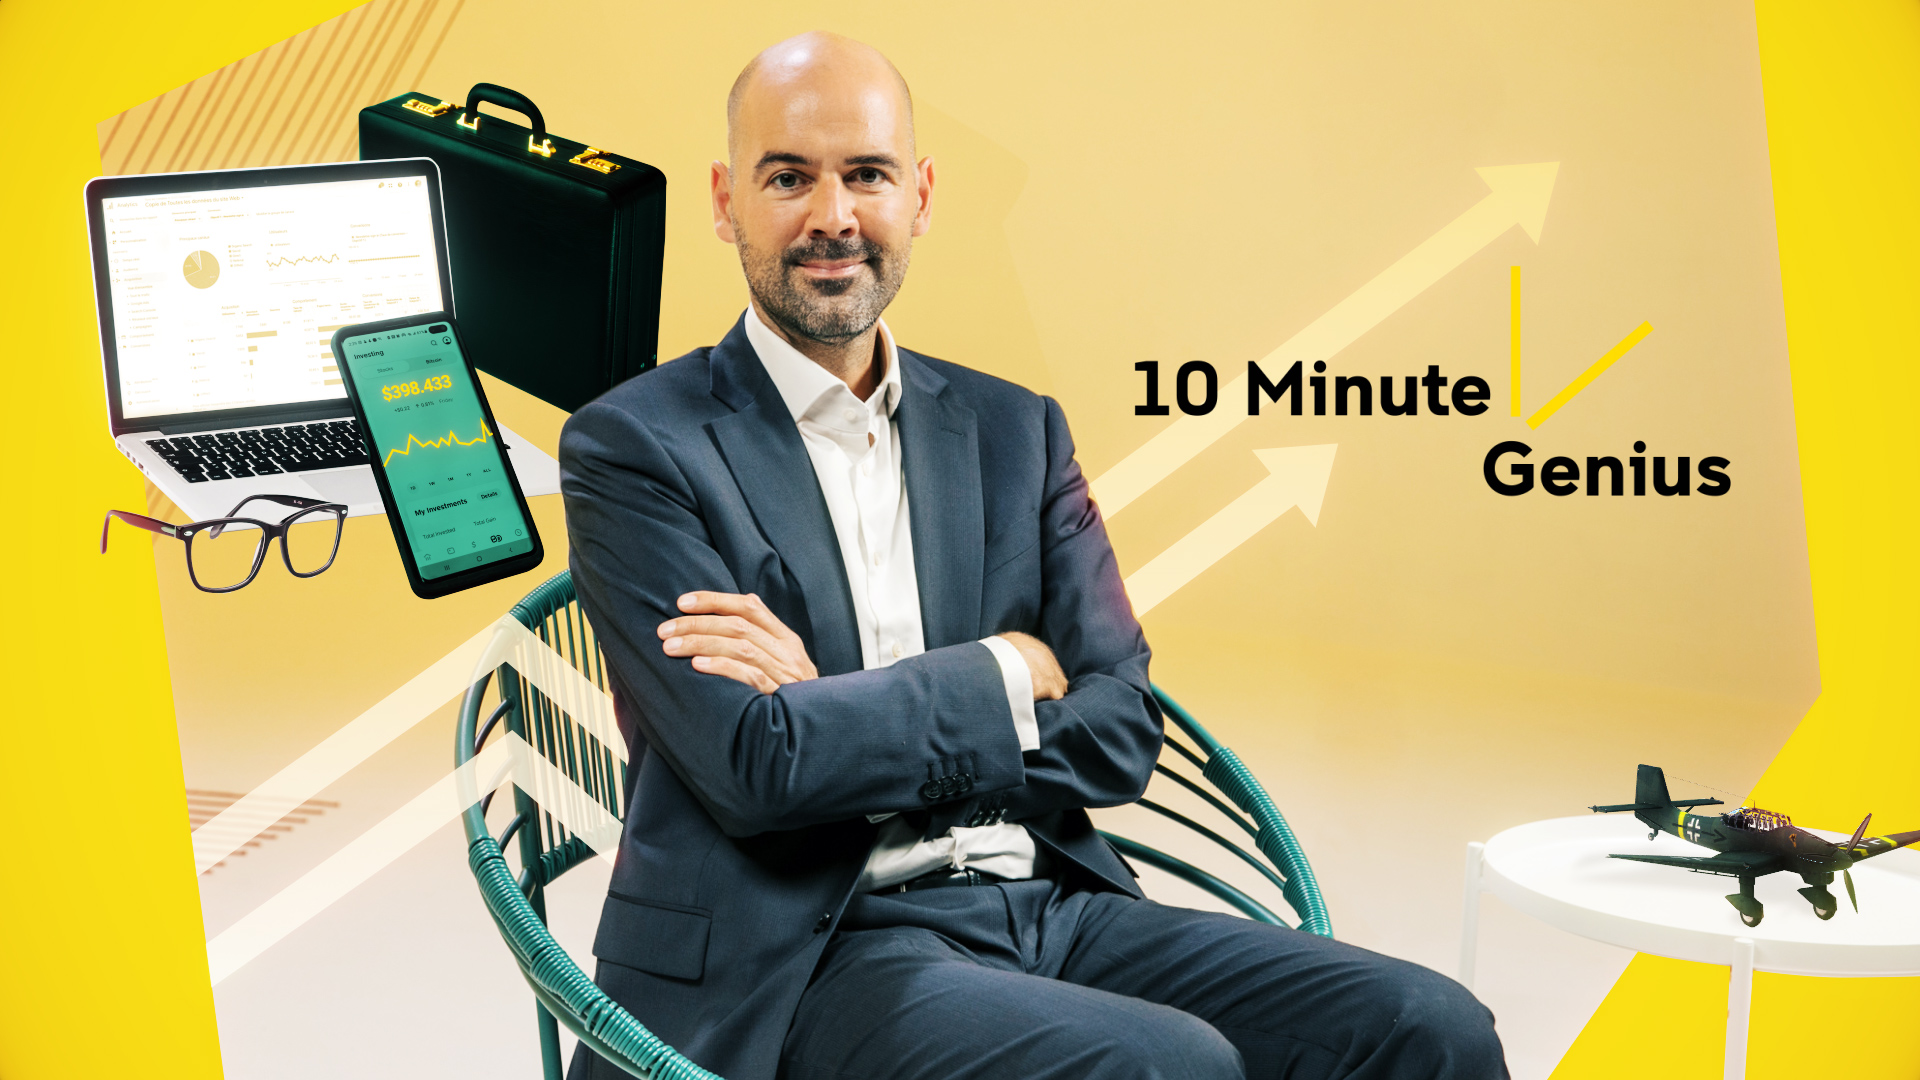   10 Minute Genius | Success and the Luck of the Draw
